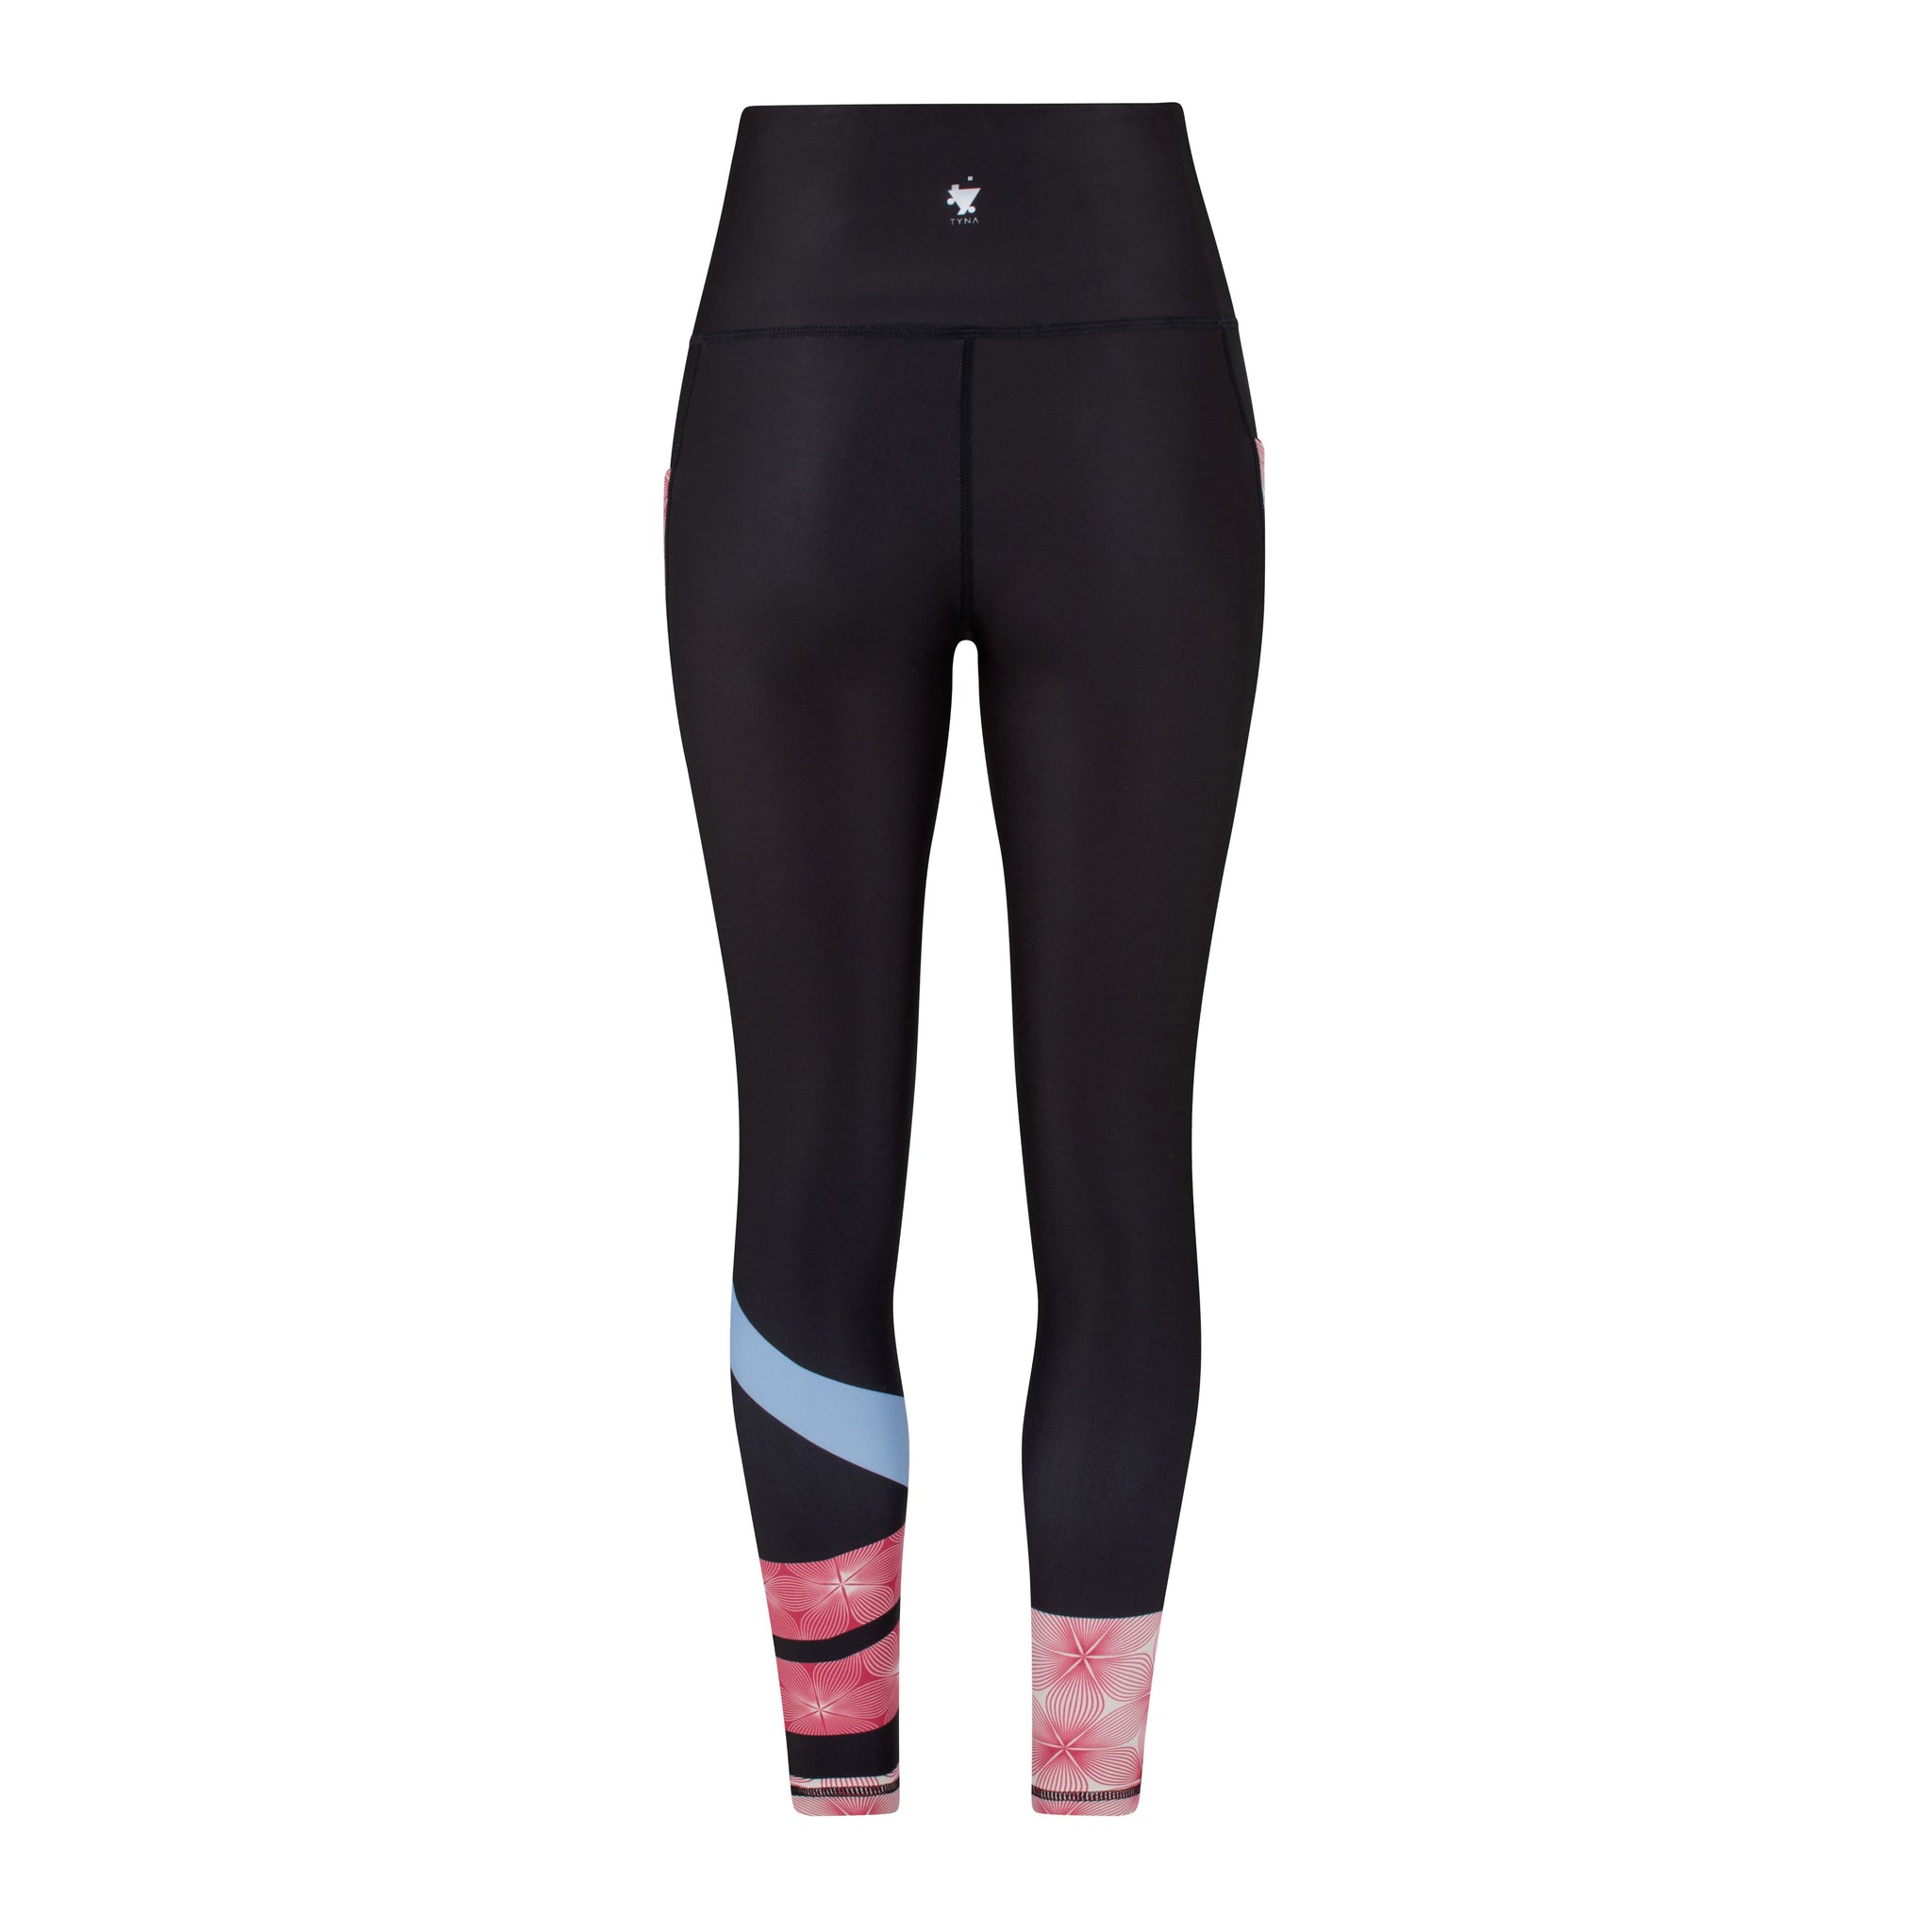 Colorful Cats Yoga Pants For Women High Waist Leggings with Pockets For Gym  Workout Tights : Amazon.co.uk: Fashion